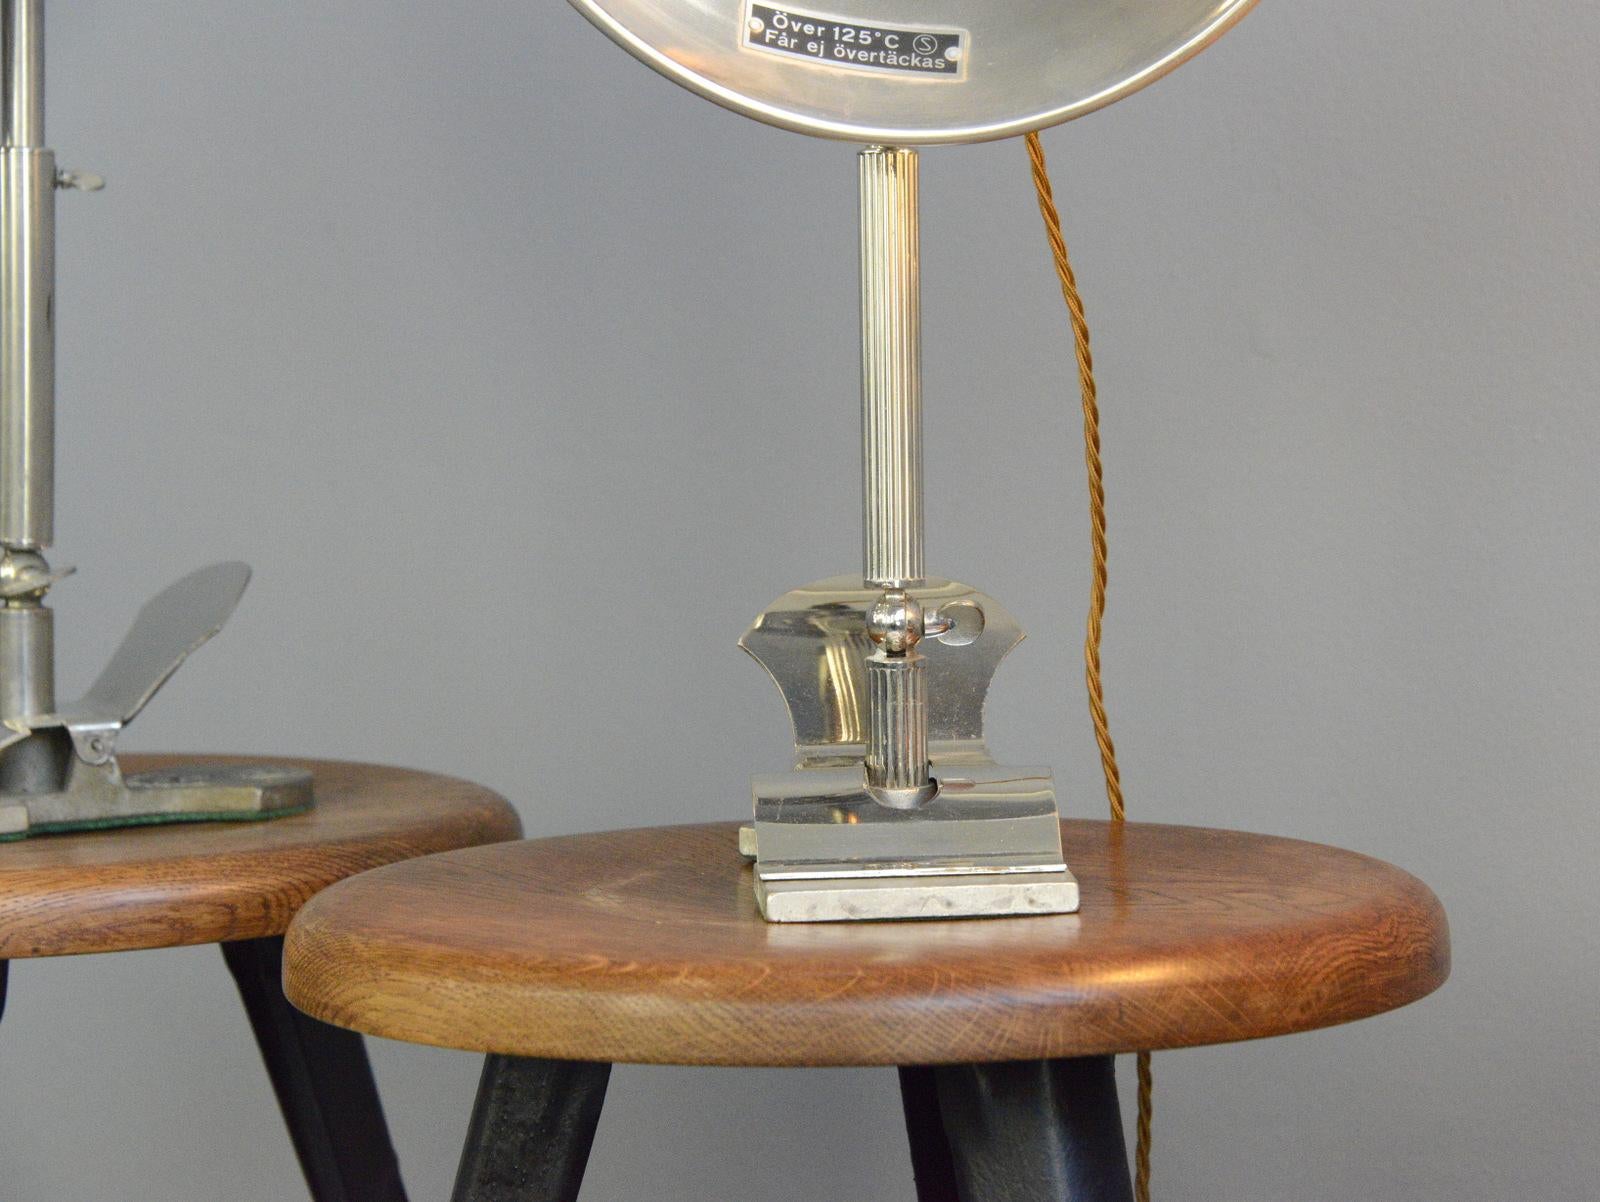 Swedish task lamps by Glory, circa 1930s

- Price is per light
- Nickel arms and shades
- Telescopic arms
- Takes E27 fitting bulbs
- Cast iron base
- Can be a desk lamp, clamp on or wall lamp
- Made by Glory
- Swedish, 1930s
- Measures: